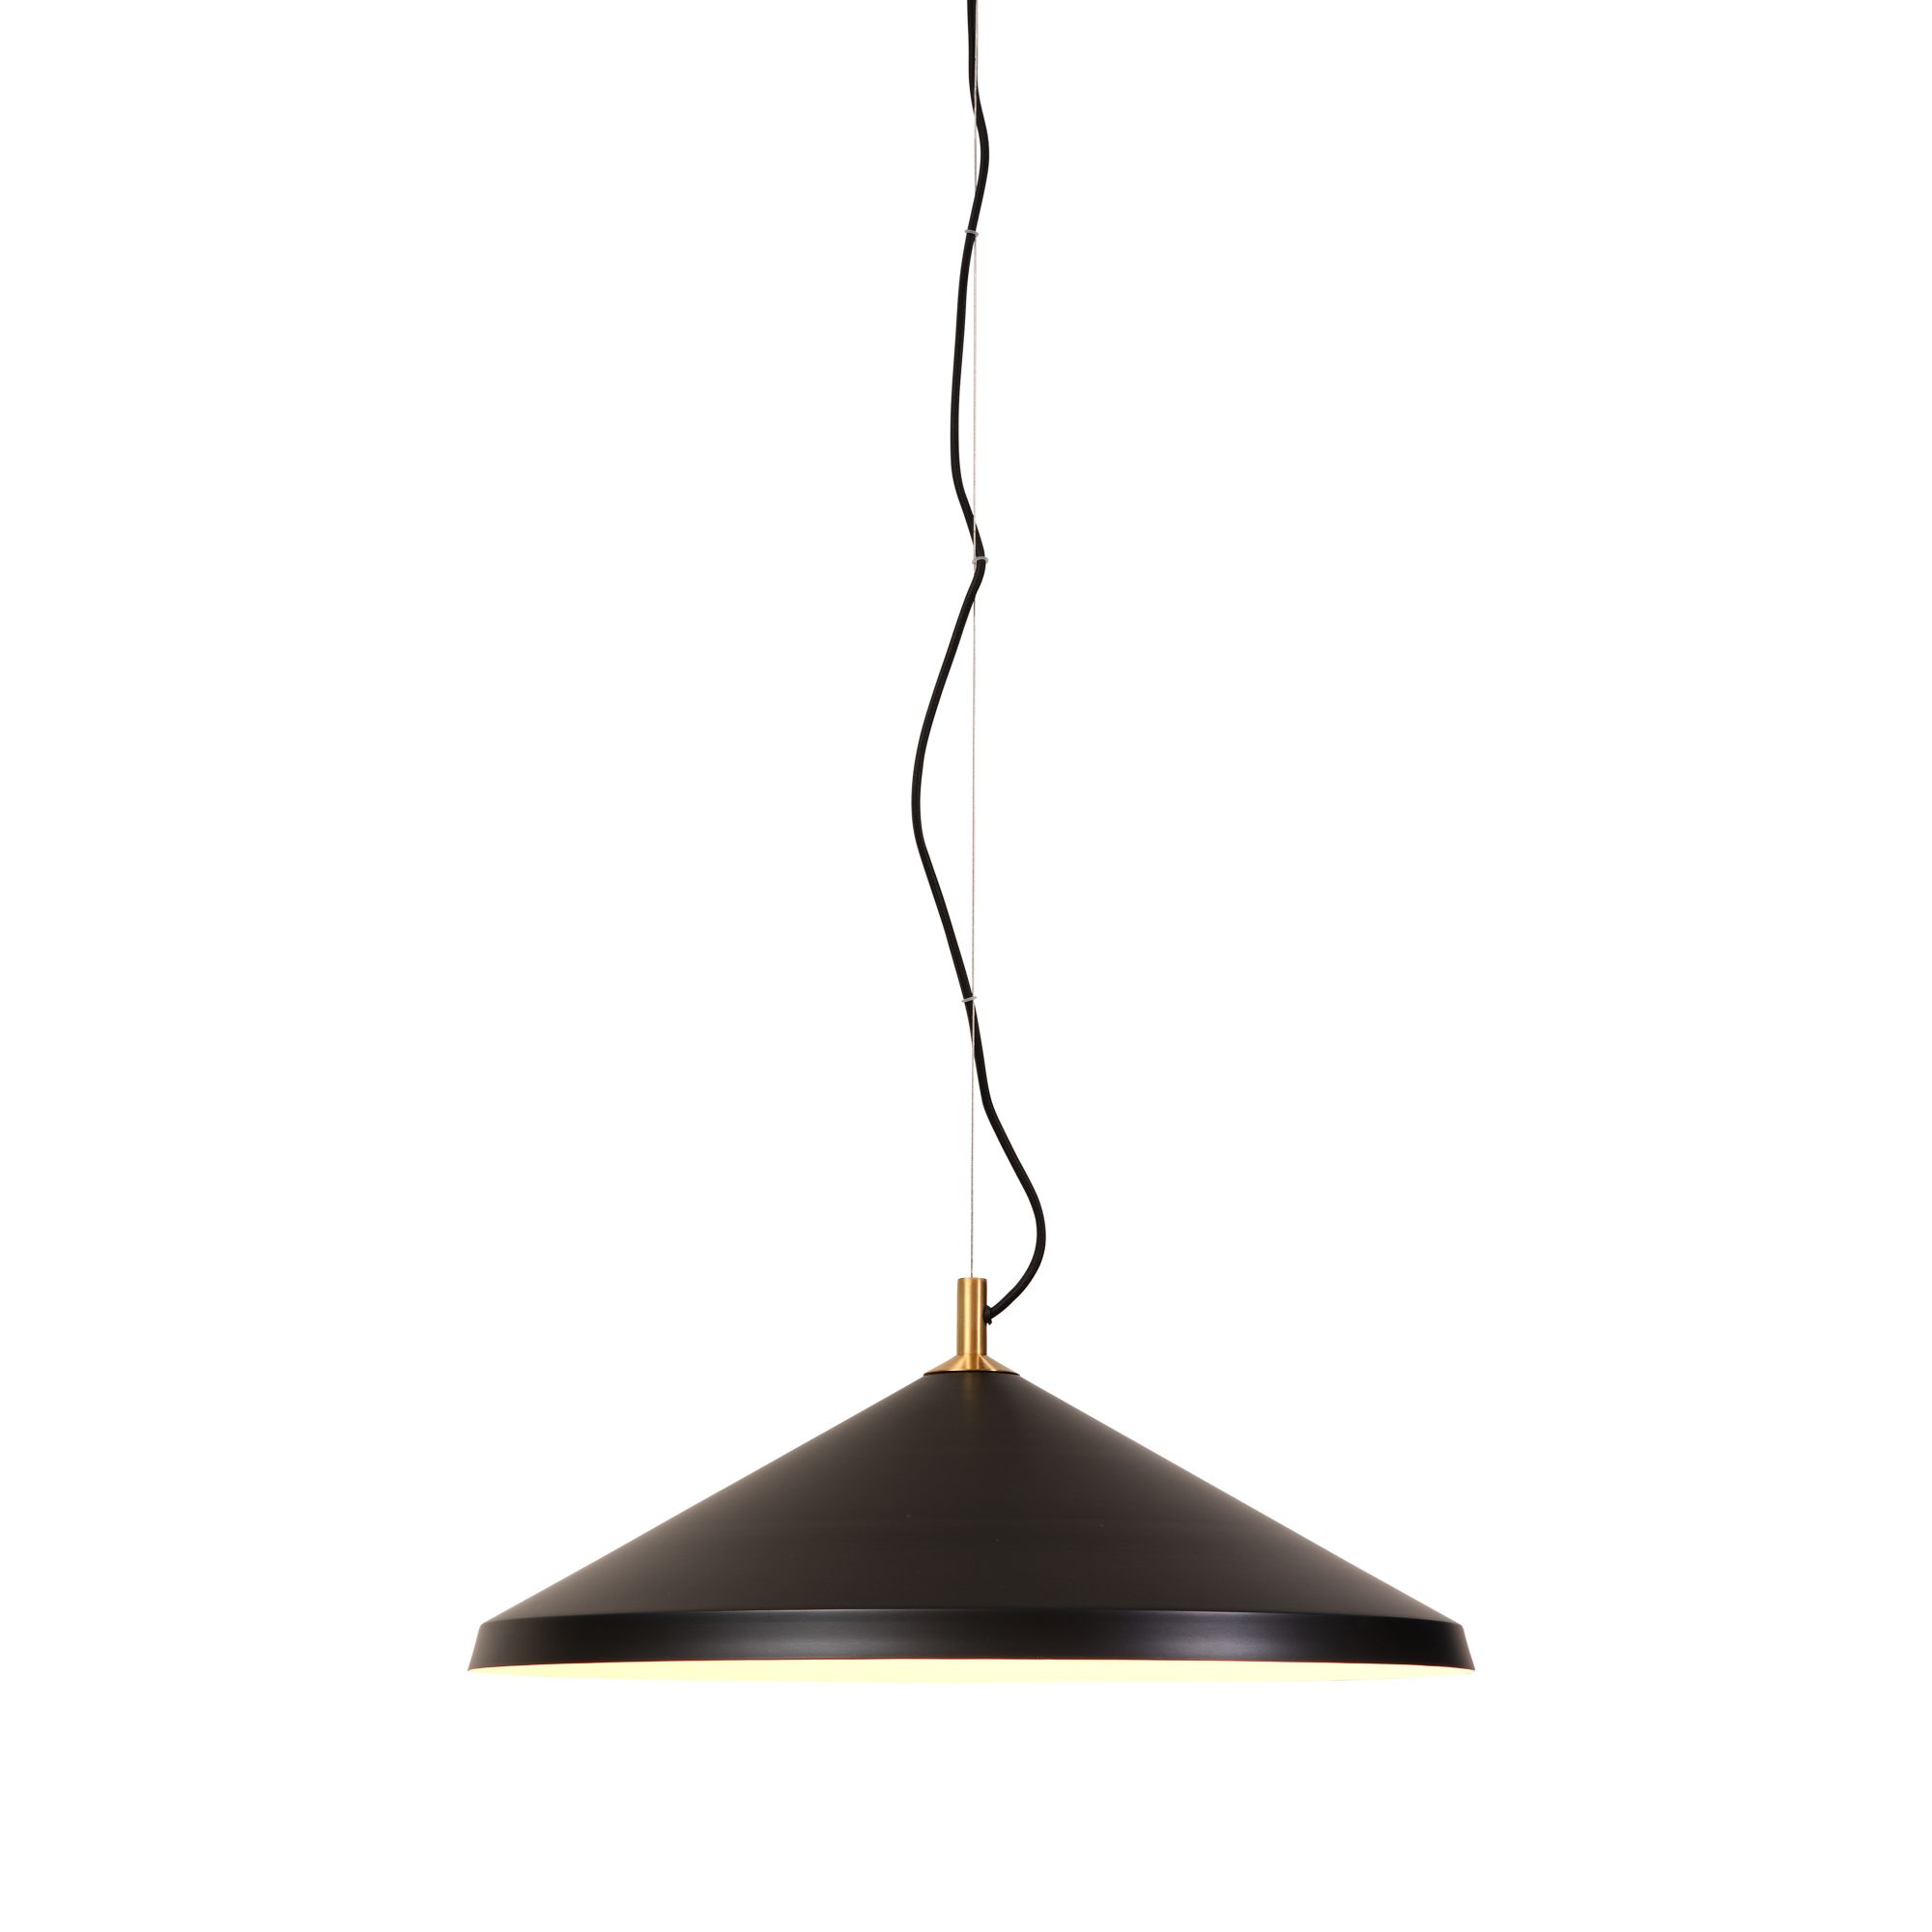 it's about RoMi Montreux Hanglamp